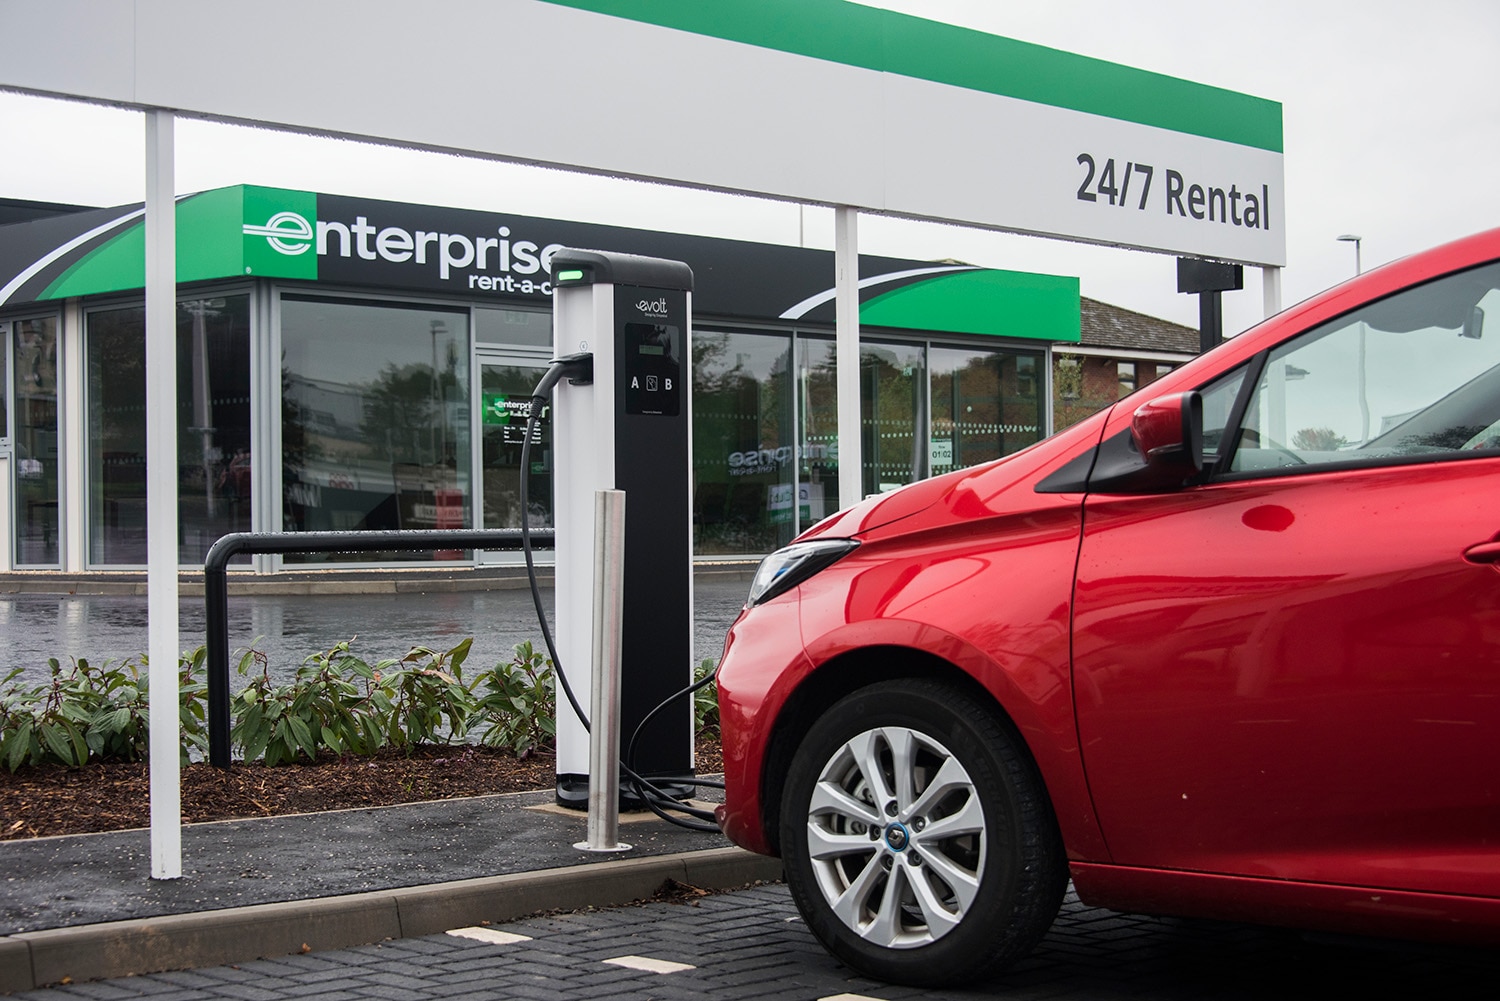 Enterprise Travel Direct Enhanced to Create Better Business Rental Experience